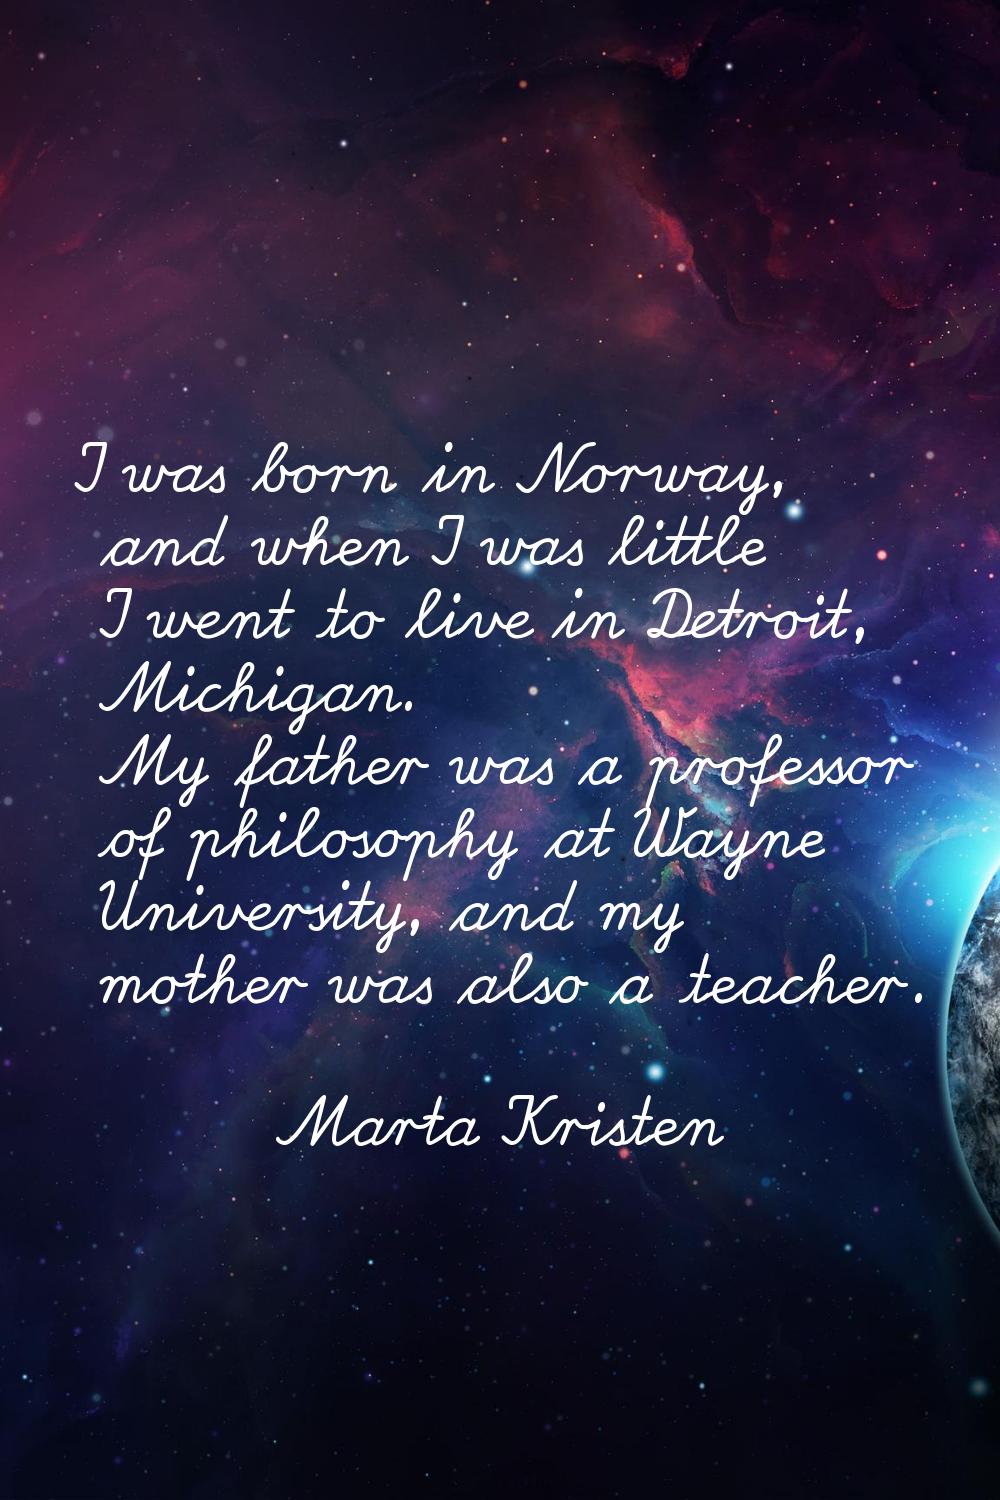 I was born in Norway, and when I was little I went to live in Detroit, Michigan. My father was a pr